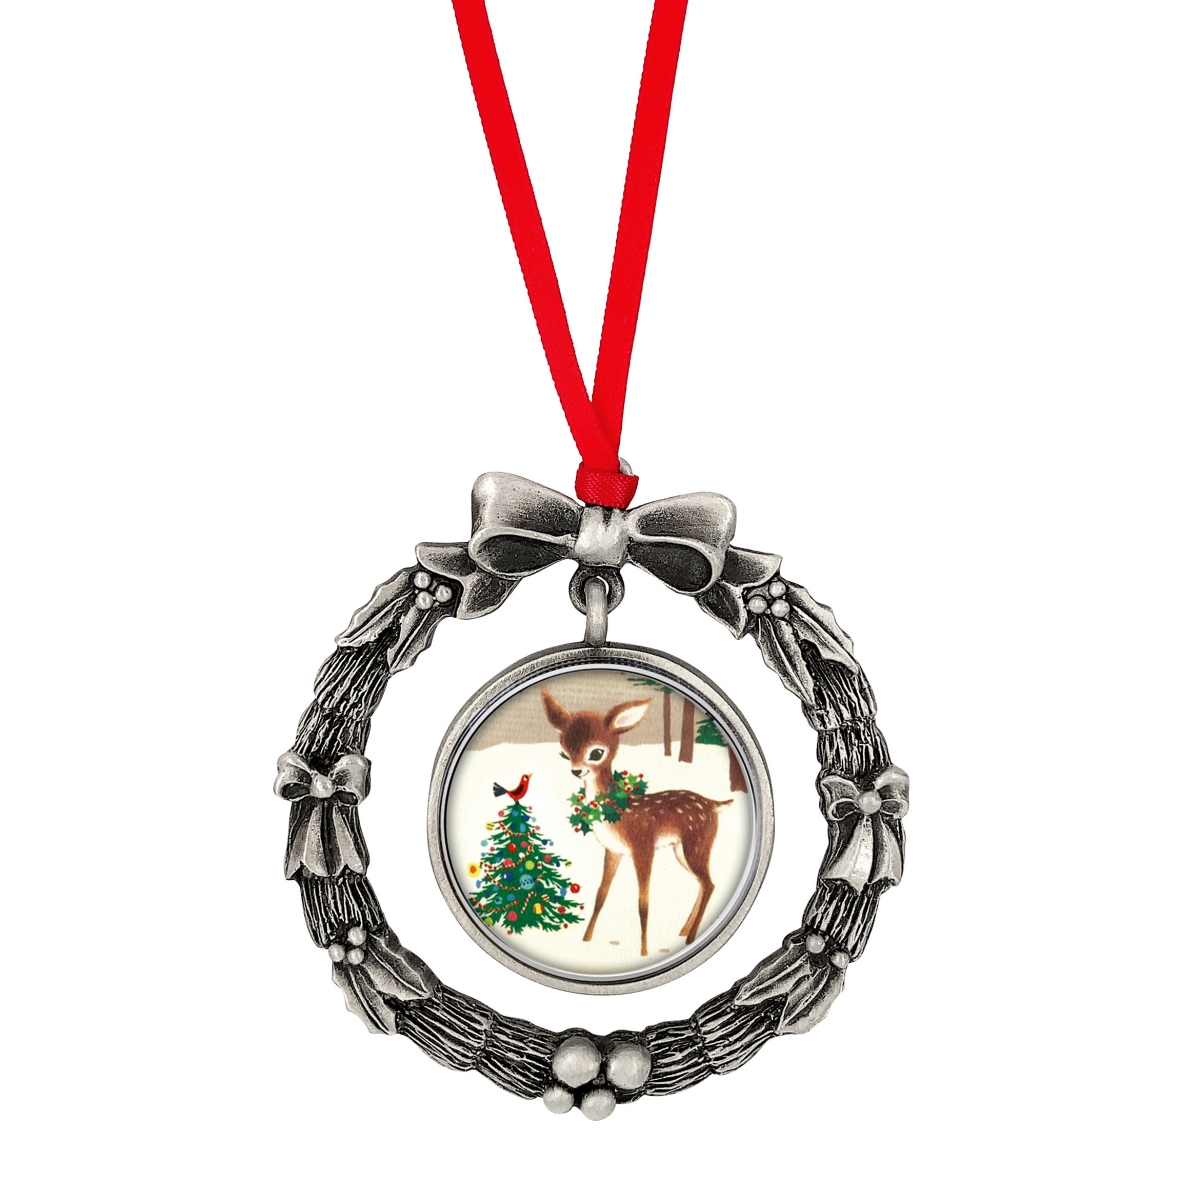 Picture of American Coin Treasures 16606 JFK Half Dollar Wreath Ornament with Colorized Reindeer Coin